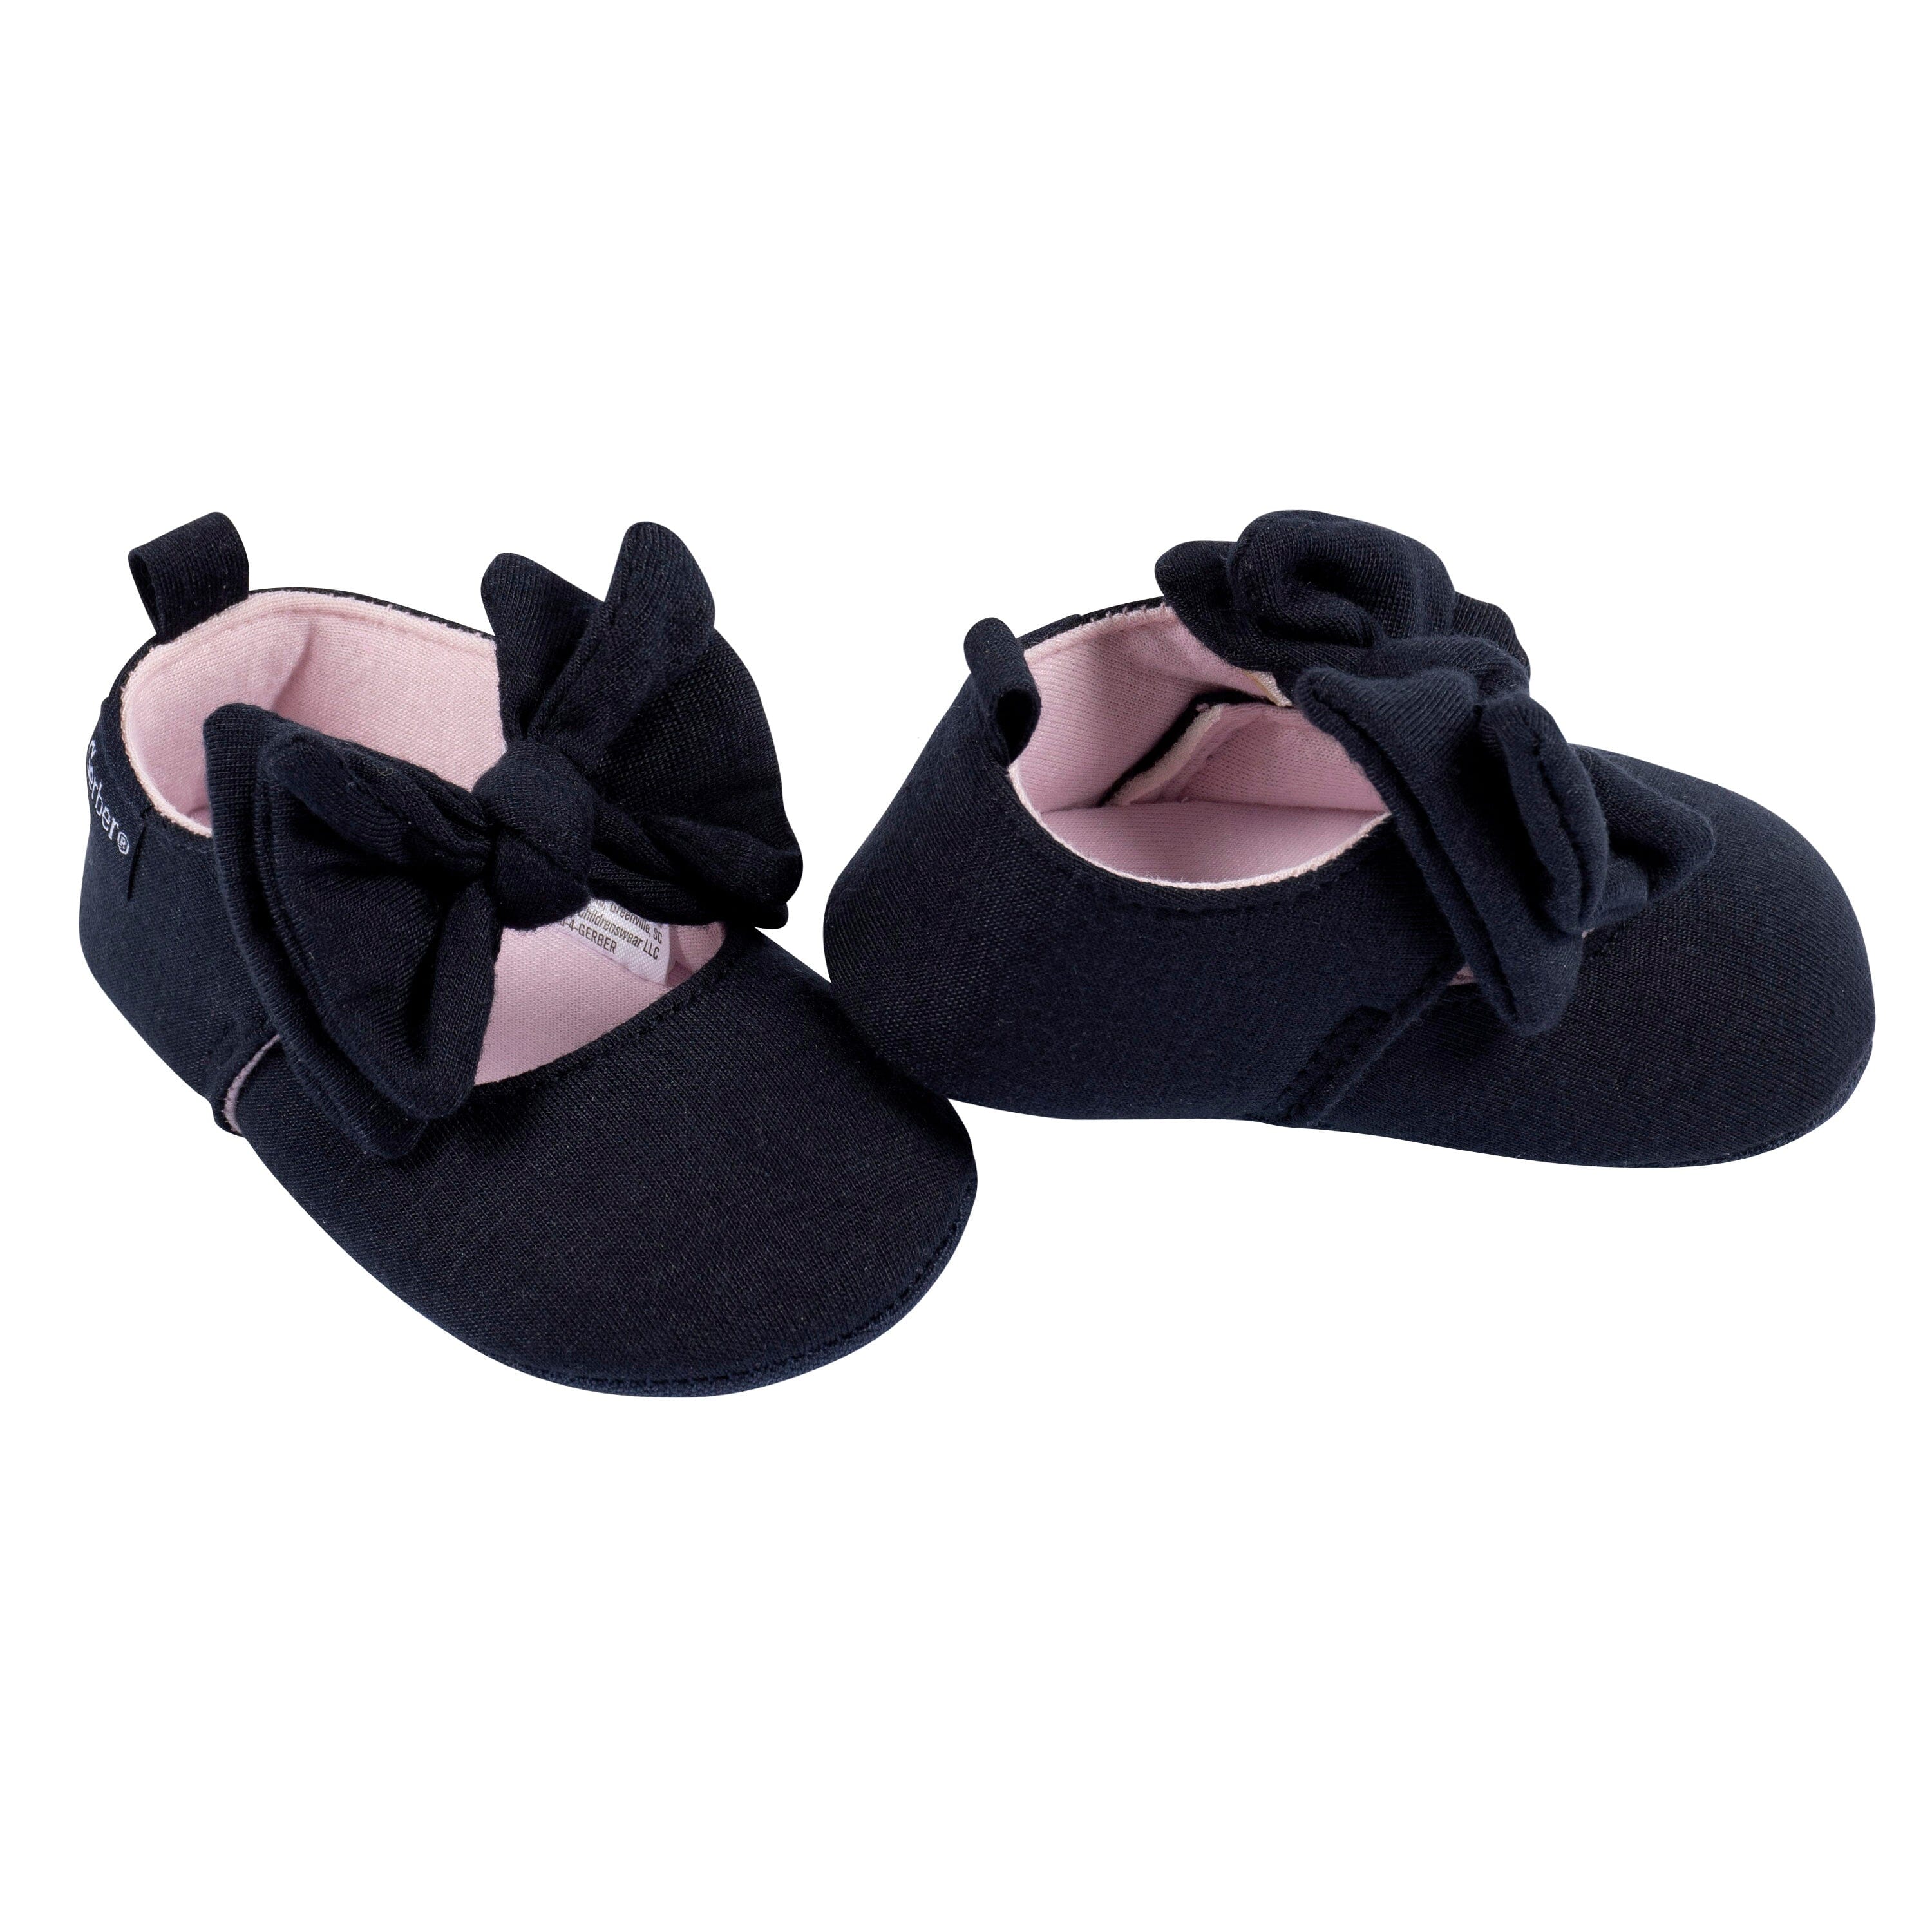 Weathered Brown Ballet Slipper For Babies | Baby Moccasins – Freshly Picked